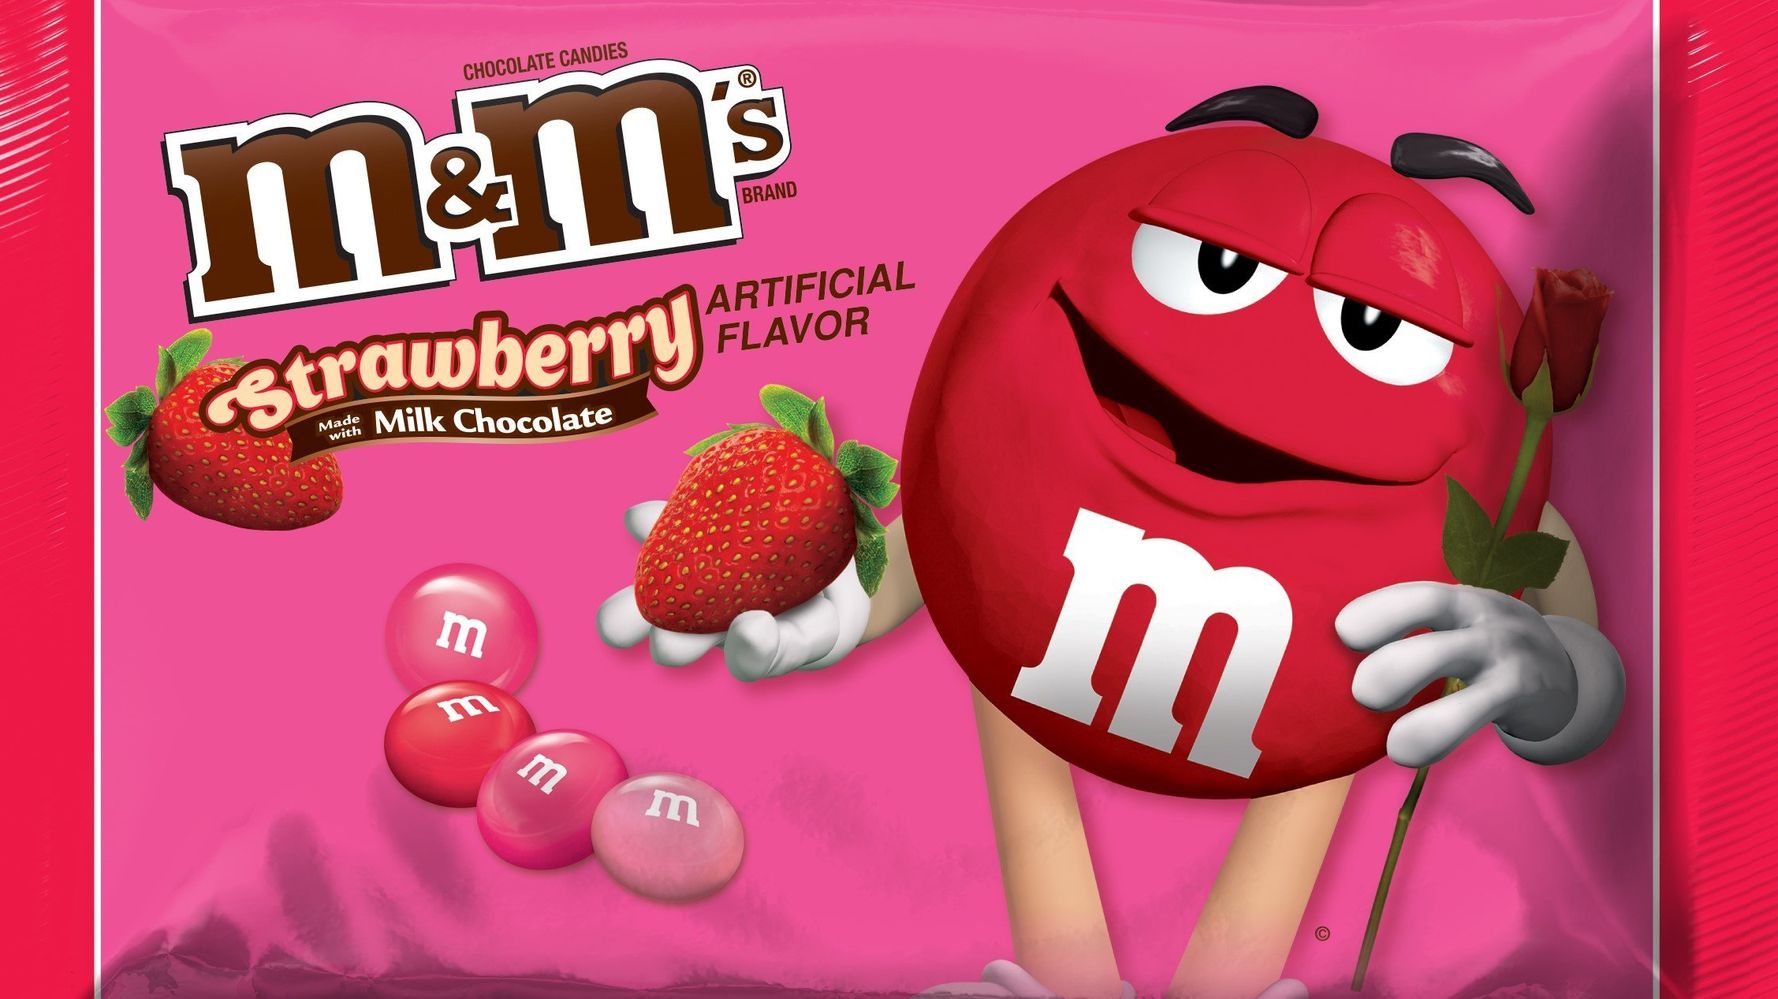 These 3 New Seasonal M&M's Flavors Look Berry, Berry Sweet